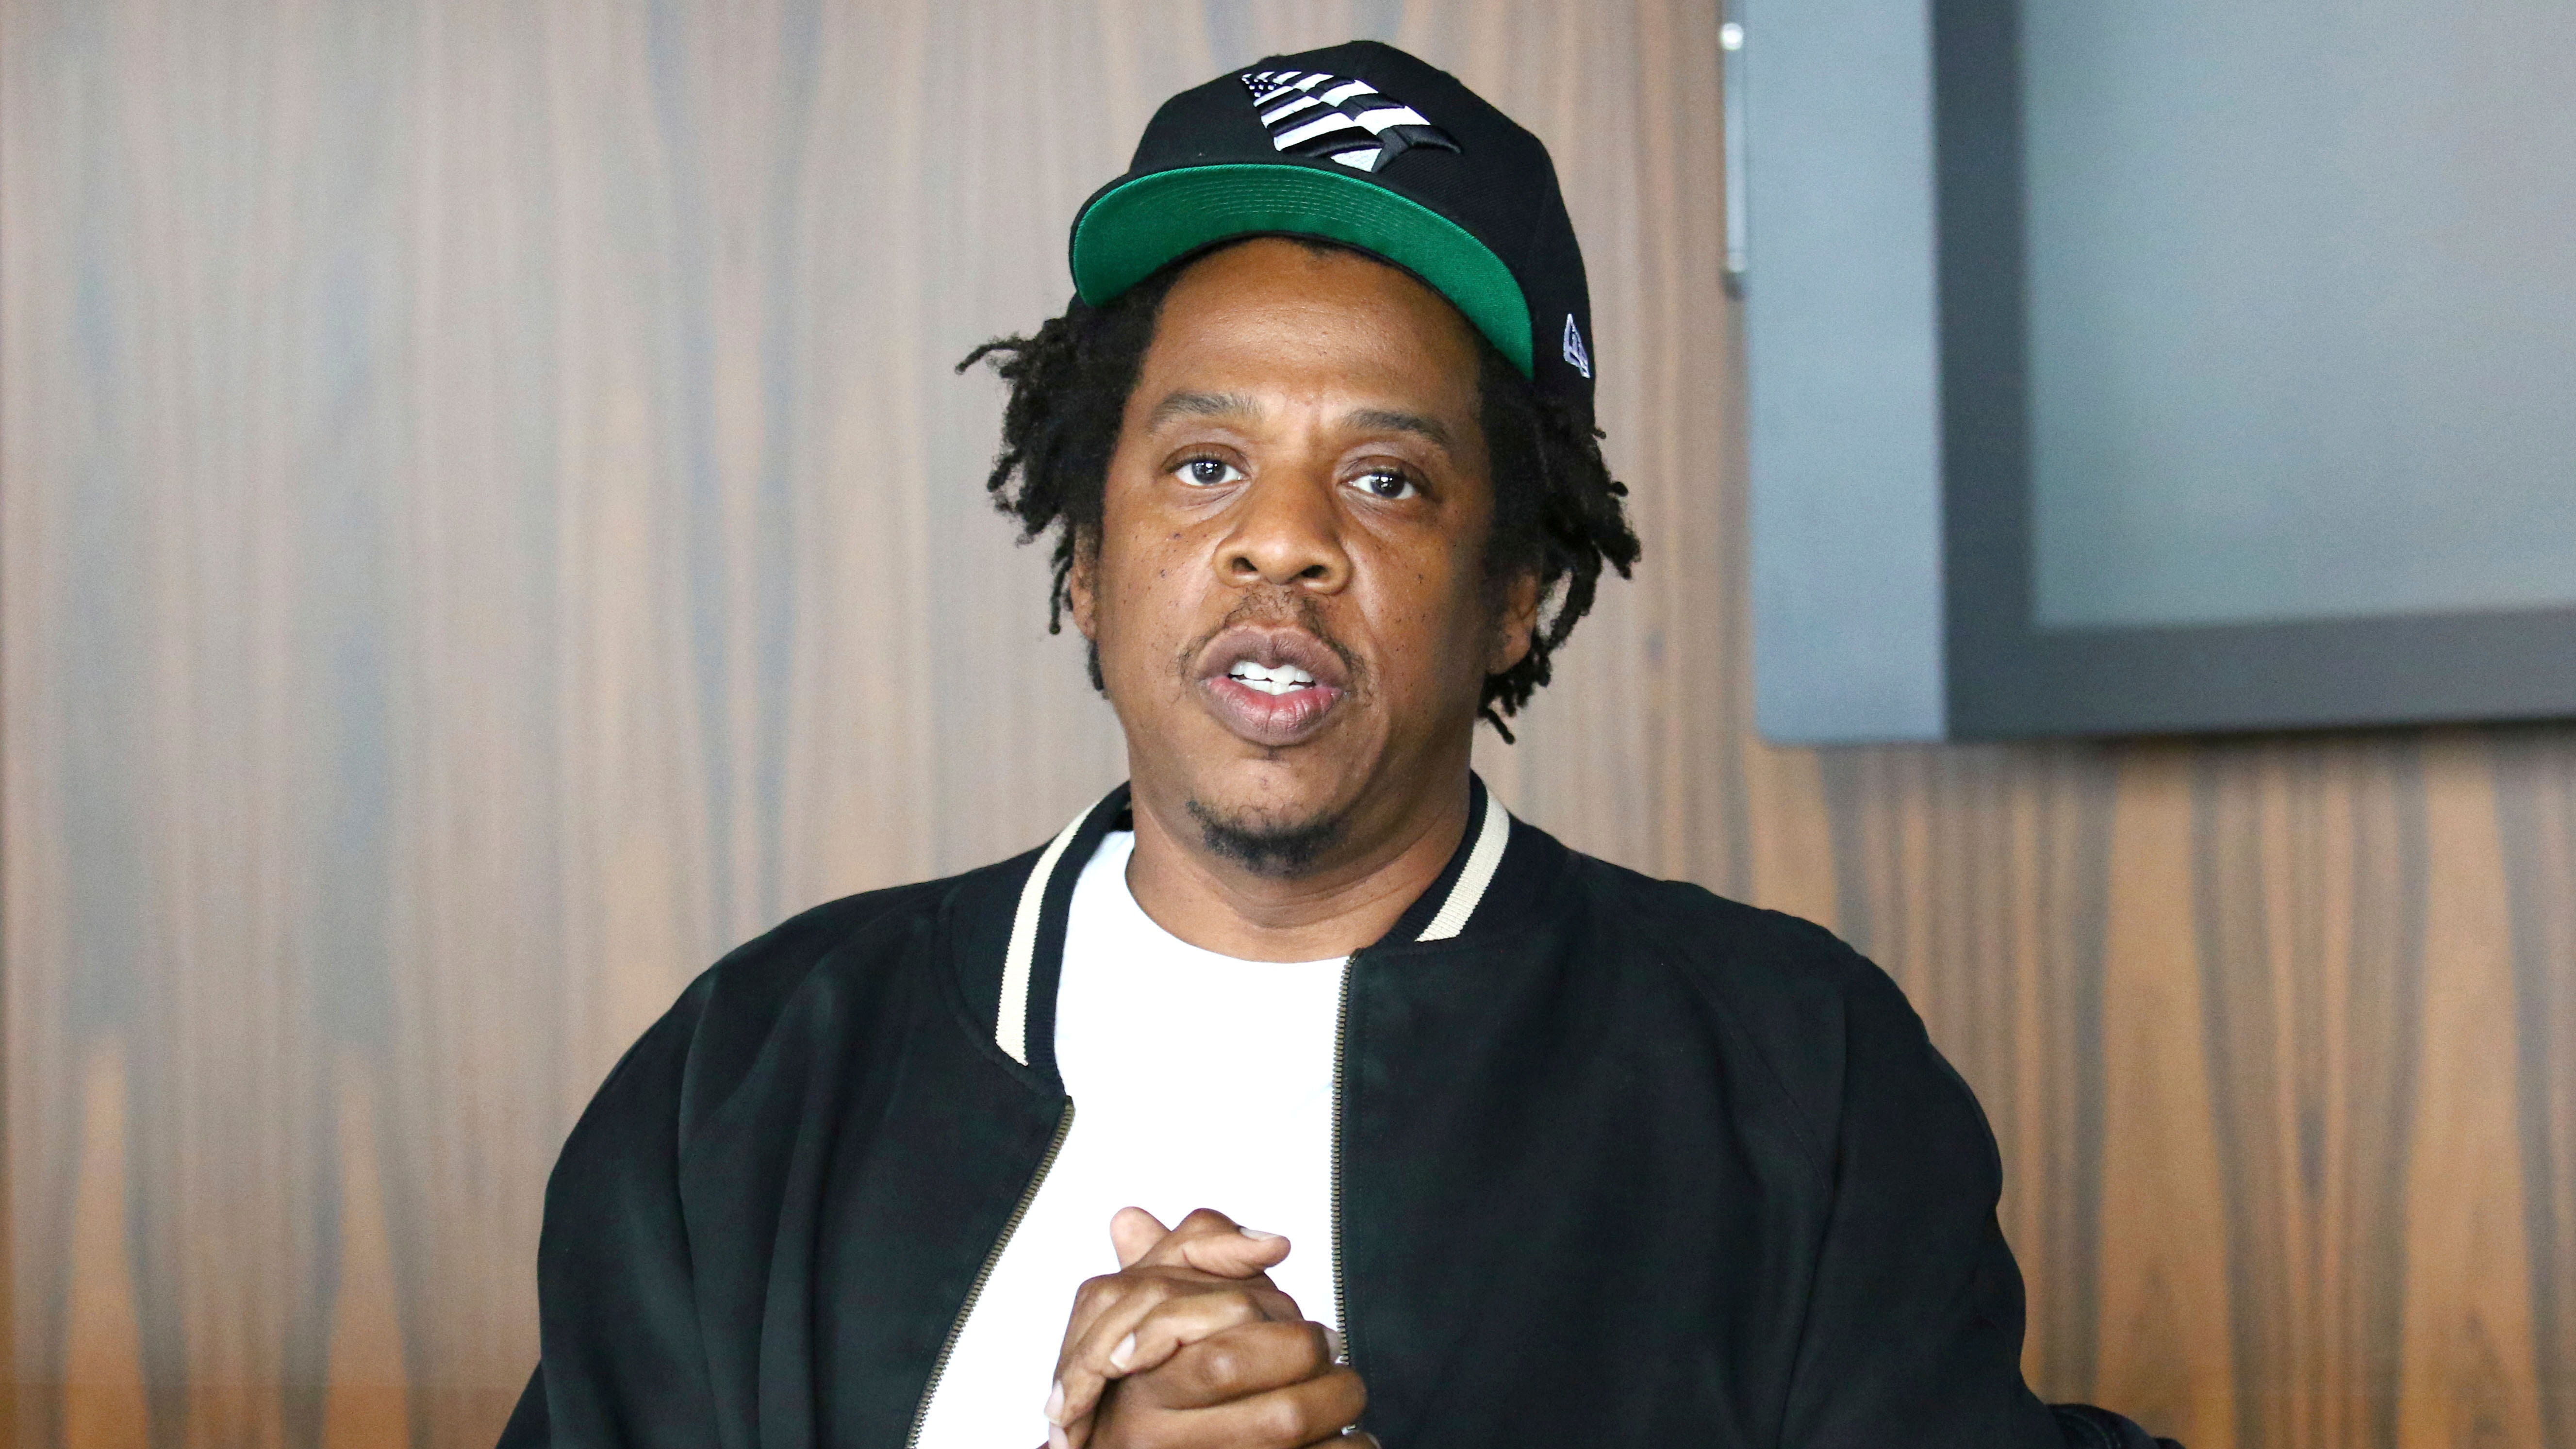 FOX NEWS: Jay-Z suing Australian children’s bookstore over use of his image and lyrics: report